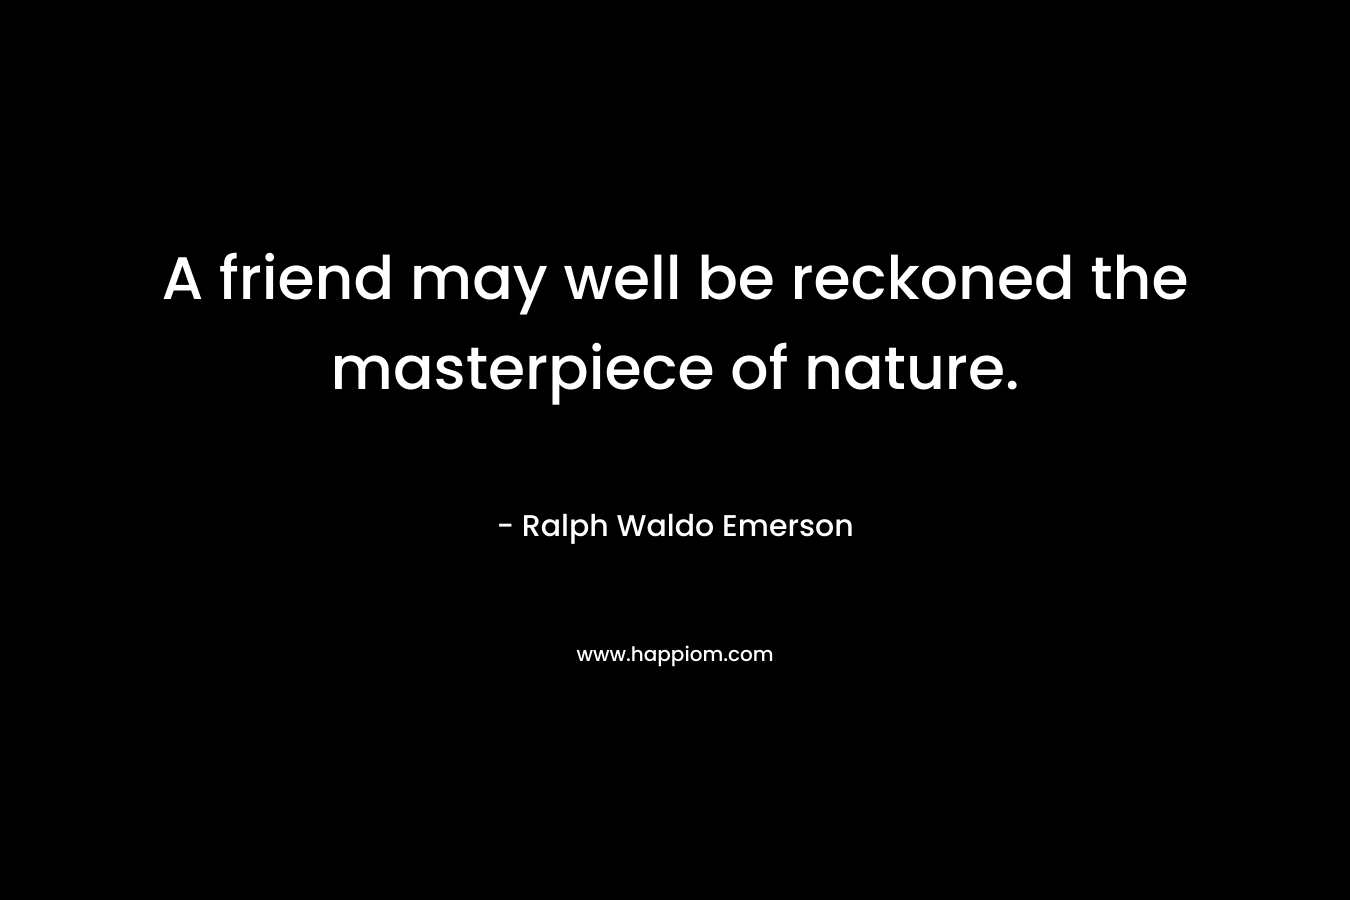 A friend may well be reckoned the masterpiece of nature.